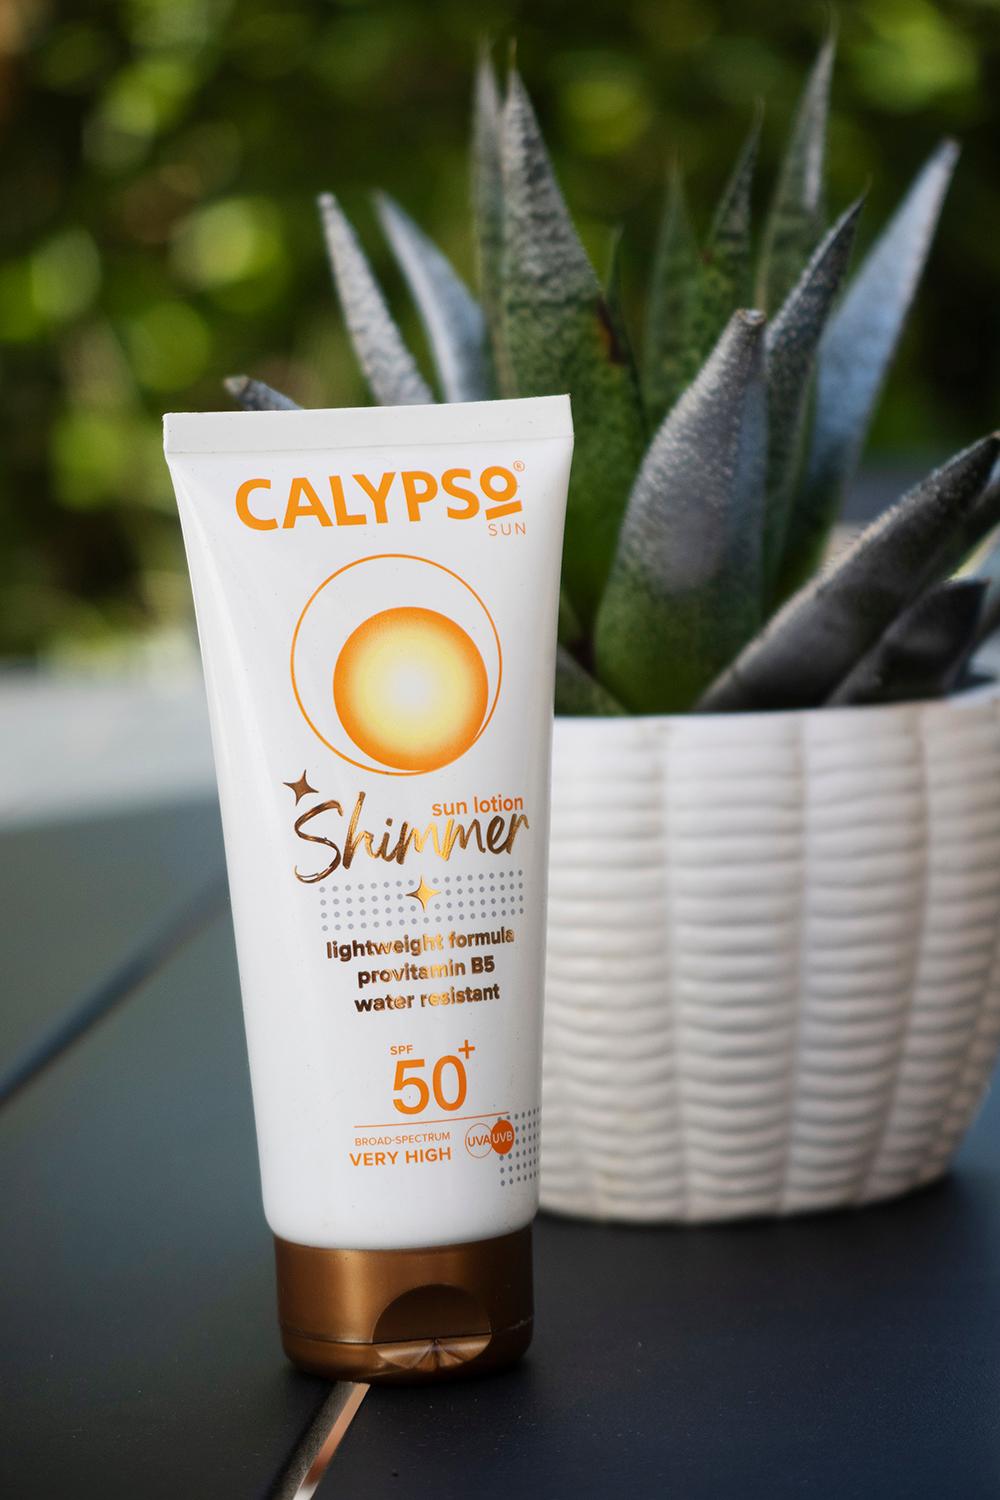 Calypso Shimmer Sun Lotion SPF50 Lifestyle on a table